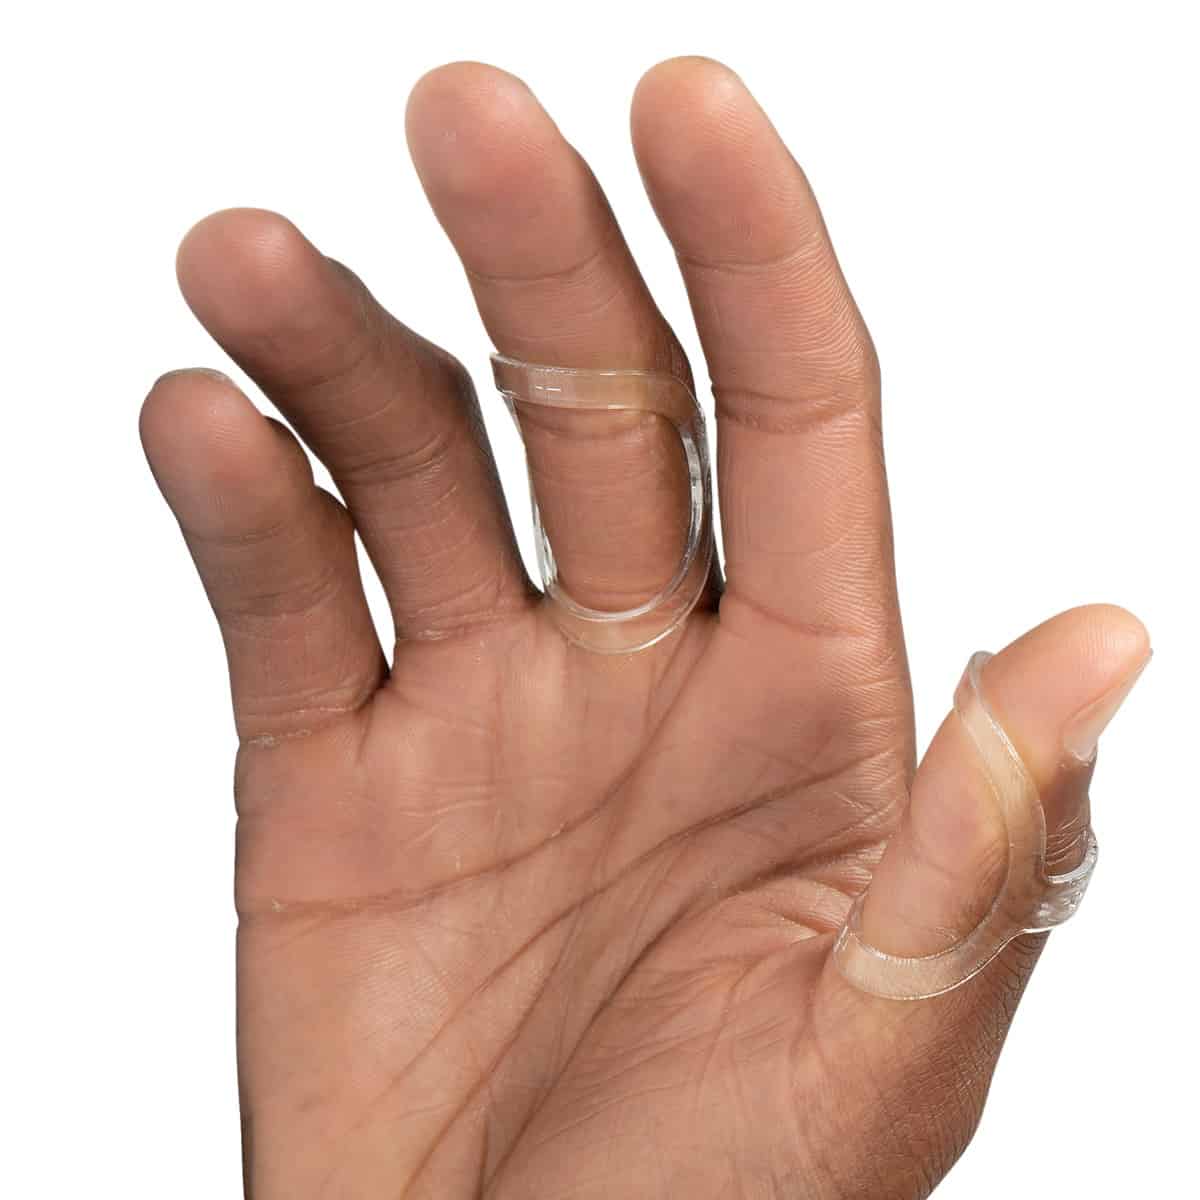 oval-8 clear finger splints for trigger finger and thumb